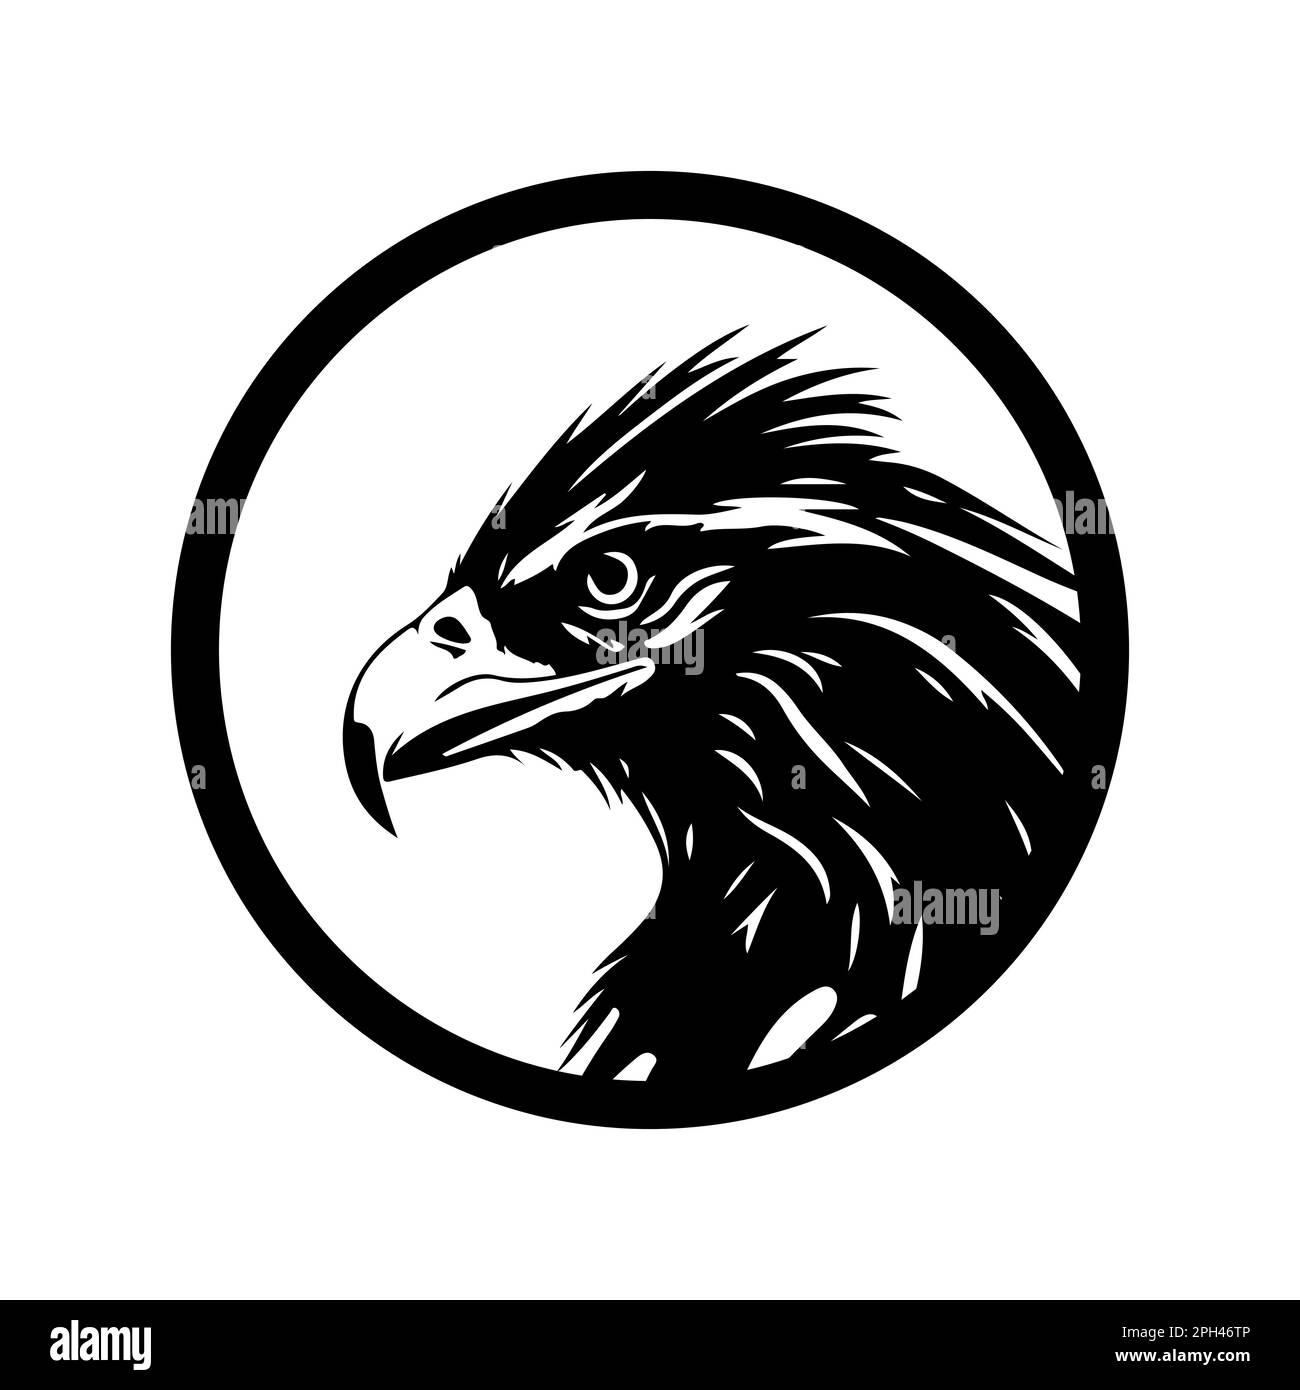 Eagle face Black and White Stock Photos & Images - Alamy